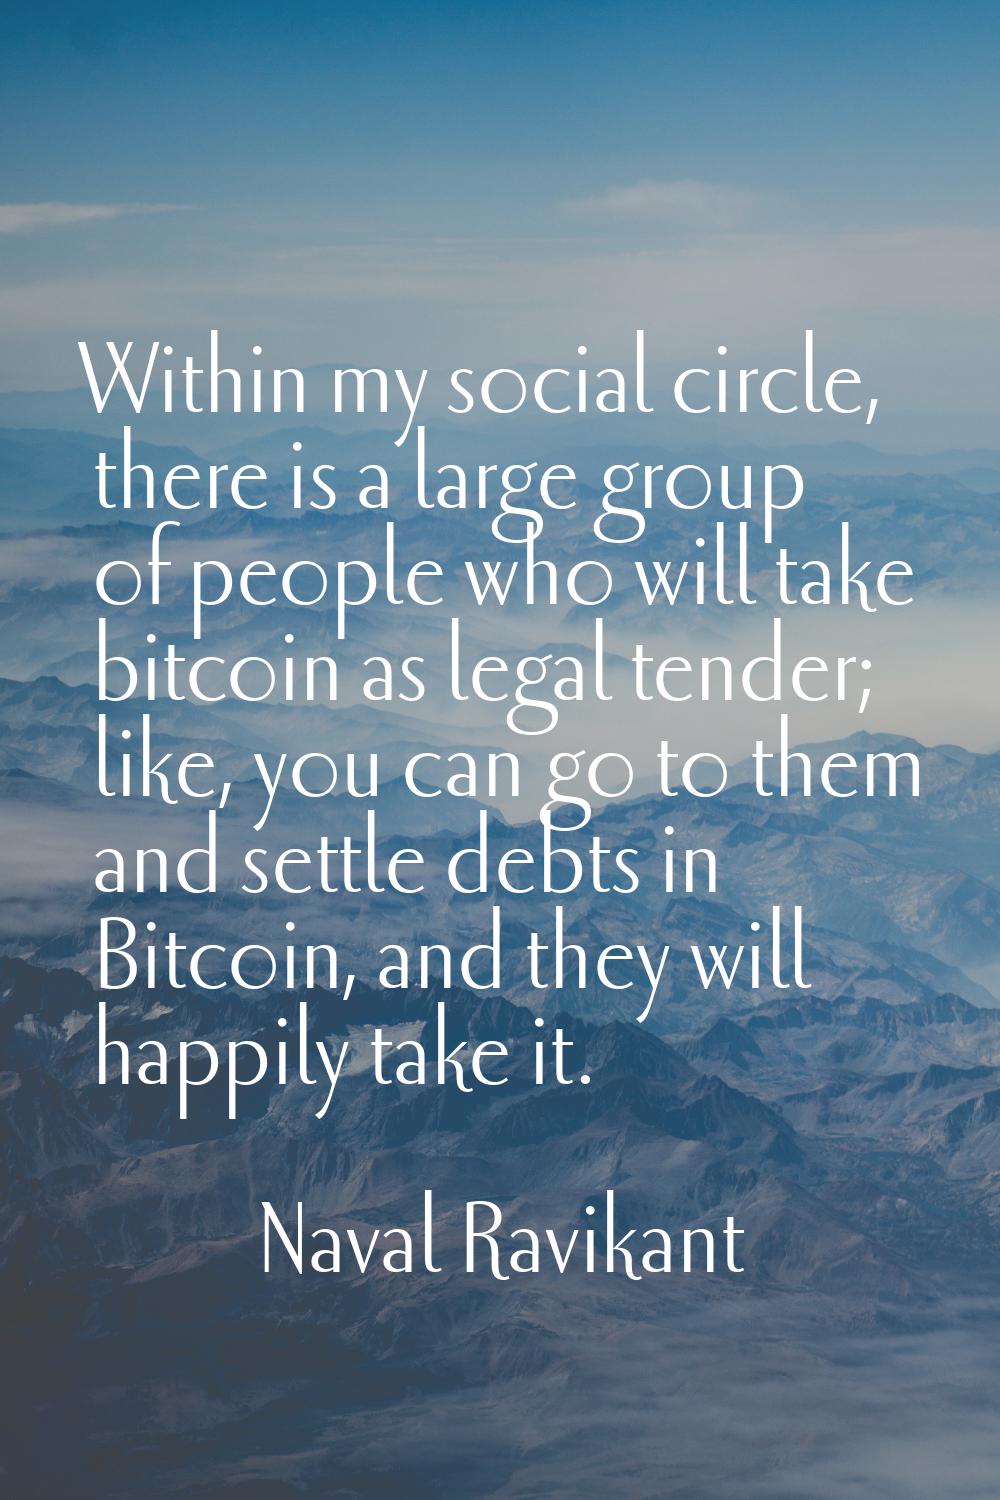 Within my social circle, there is a large group of people who will take bitcoin as legal tender; li